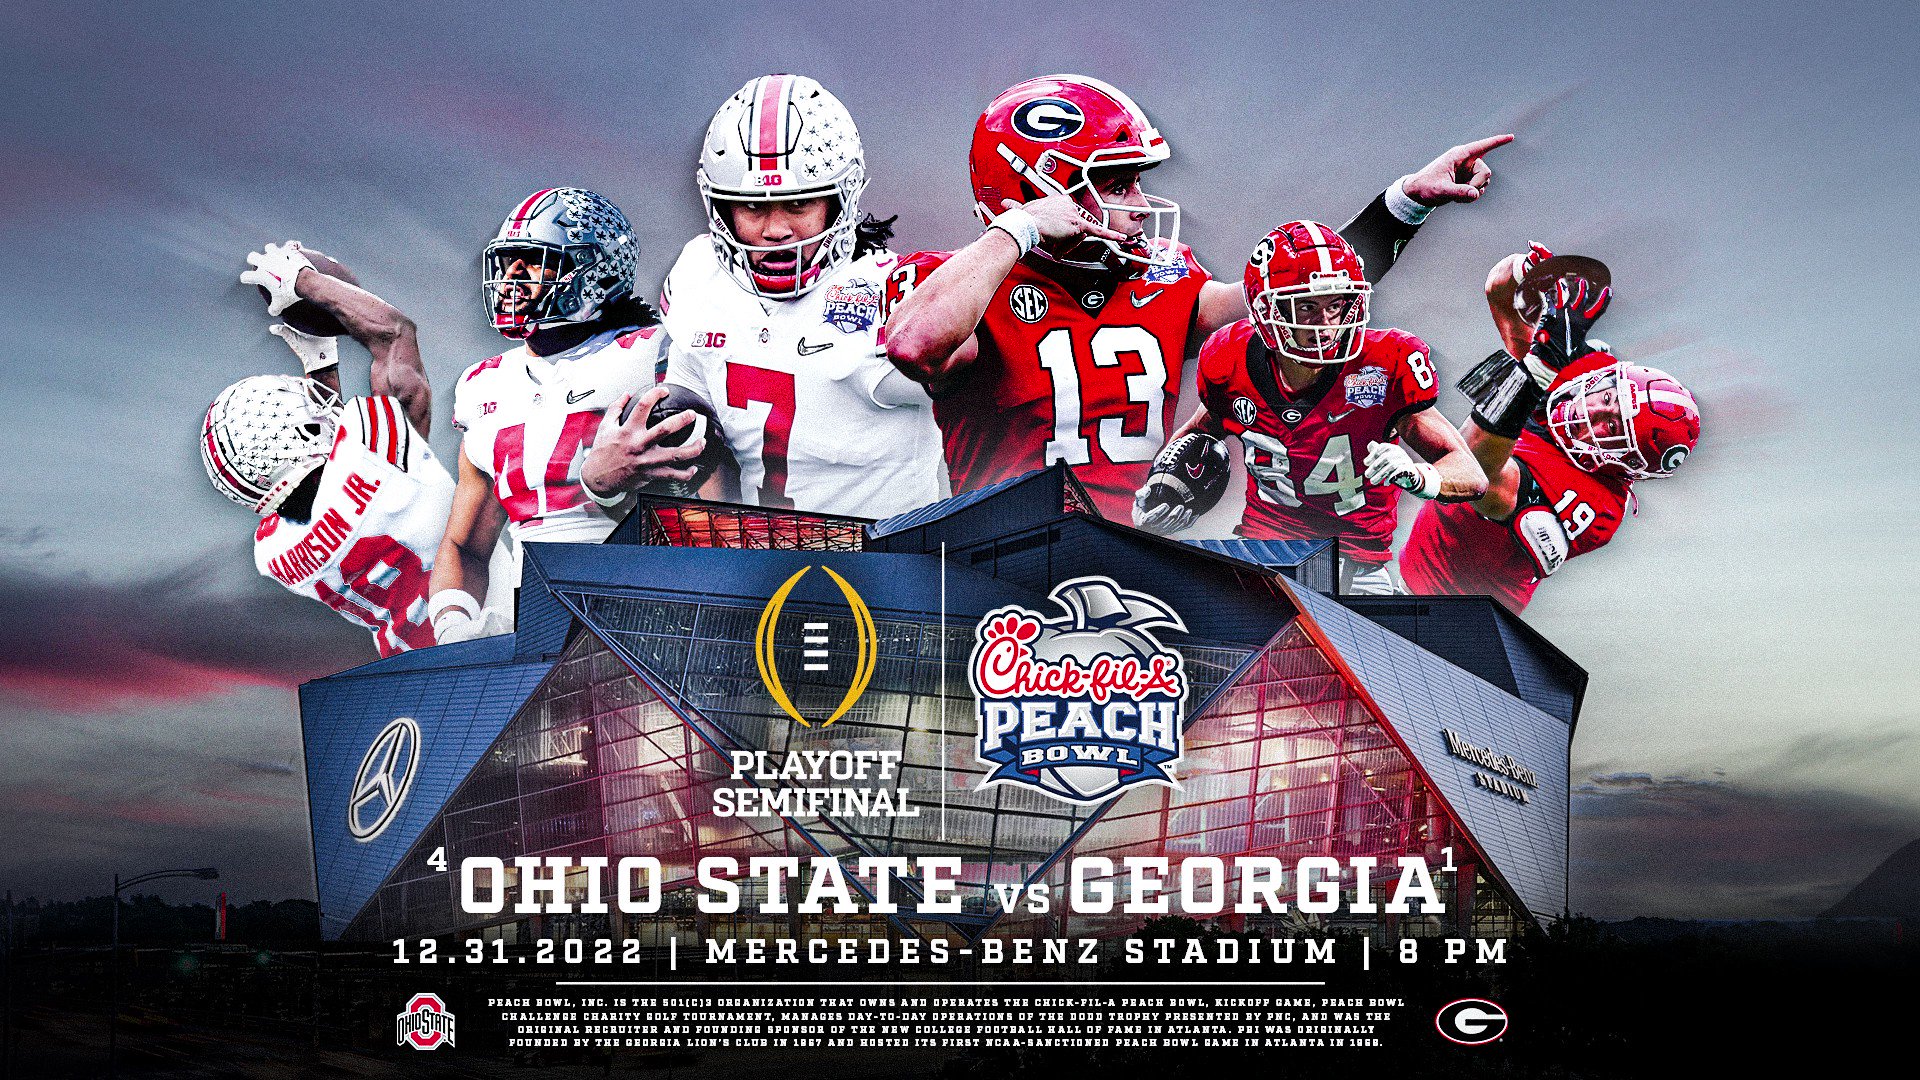 Peach Bowl Preview: Despite Opt-Outs, Georgia is a Fearsome Foe